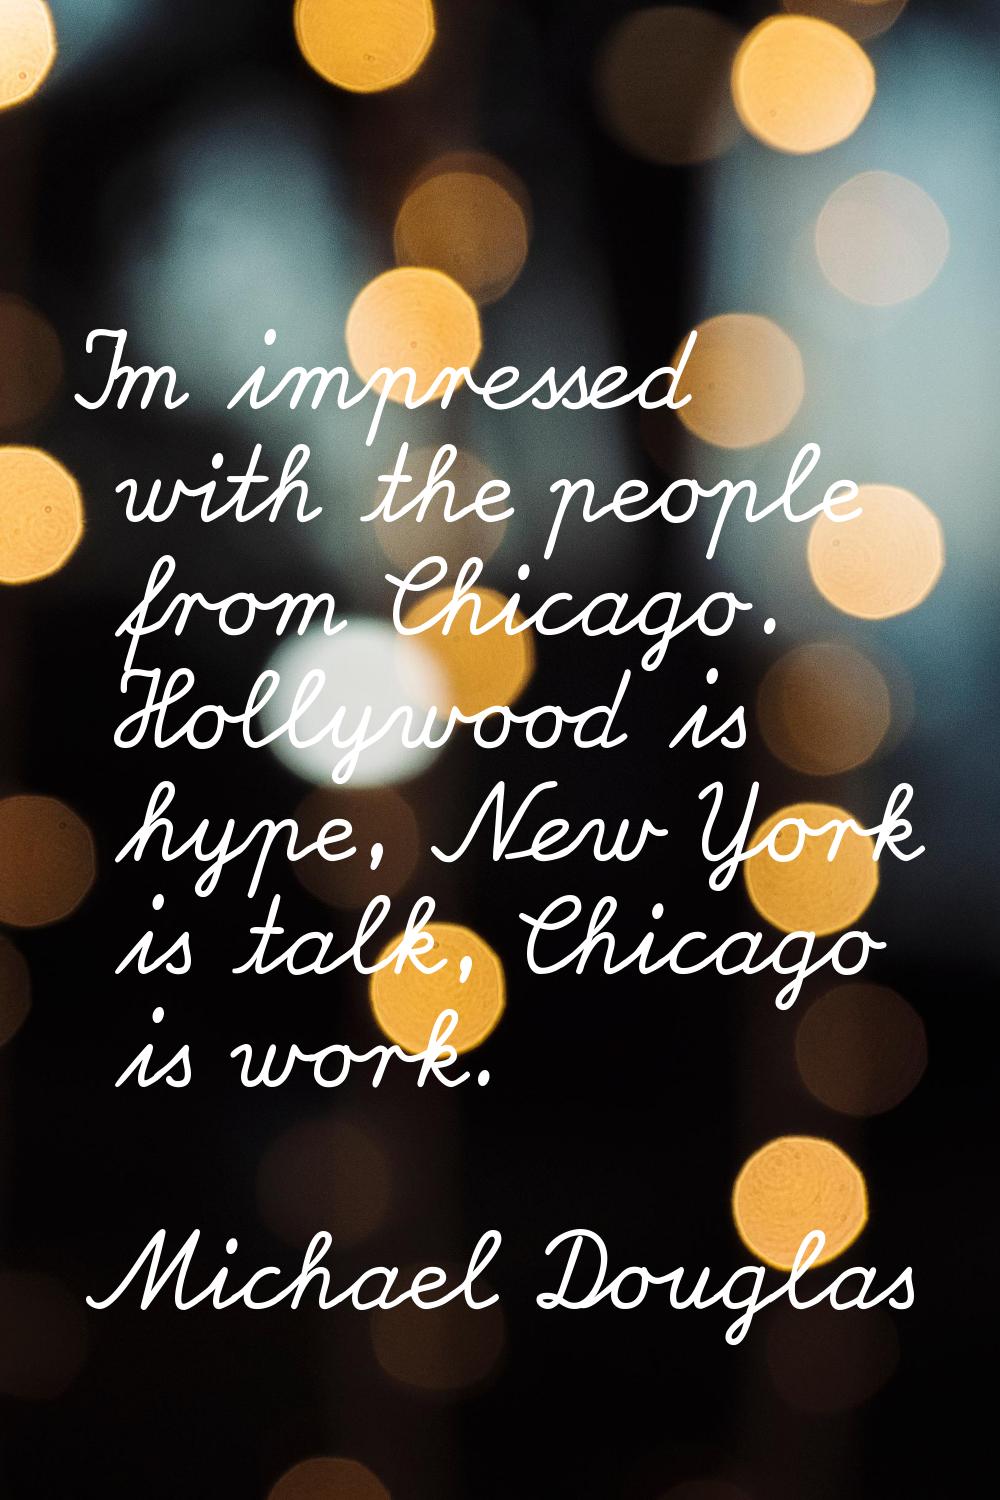 I'm impressed with the people from Chicago. Hollywood is hype, New York is talk, Chicago is work.